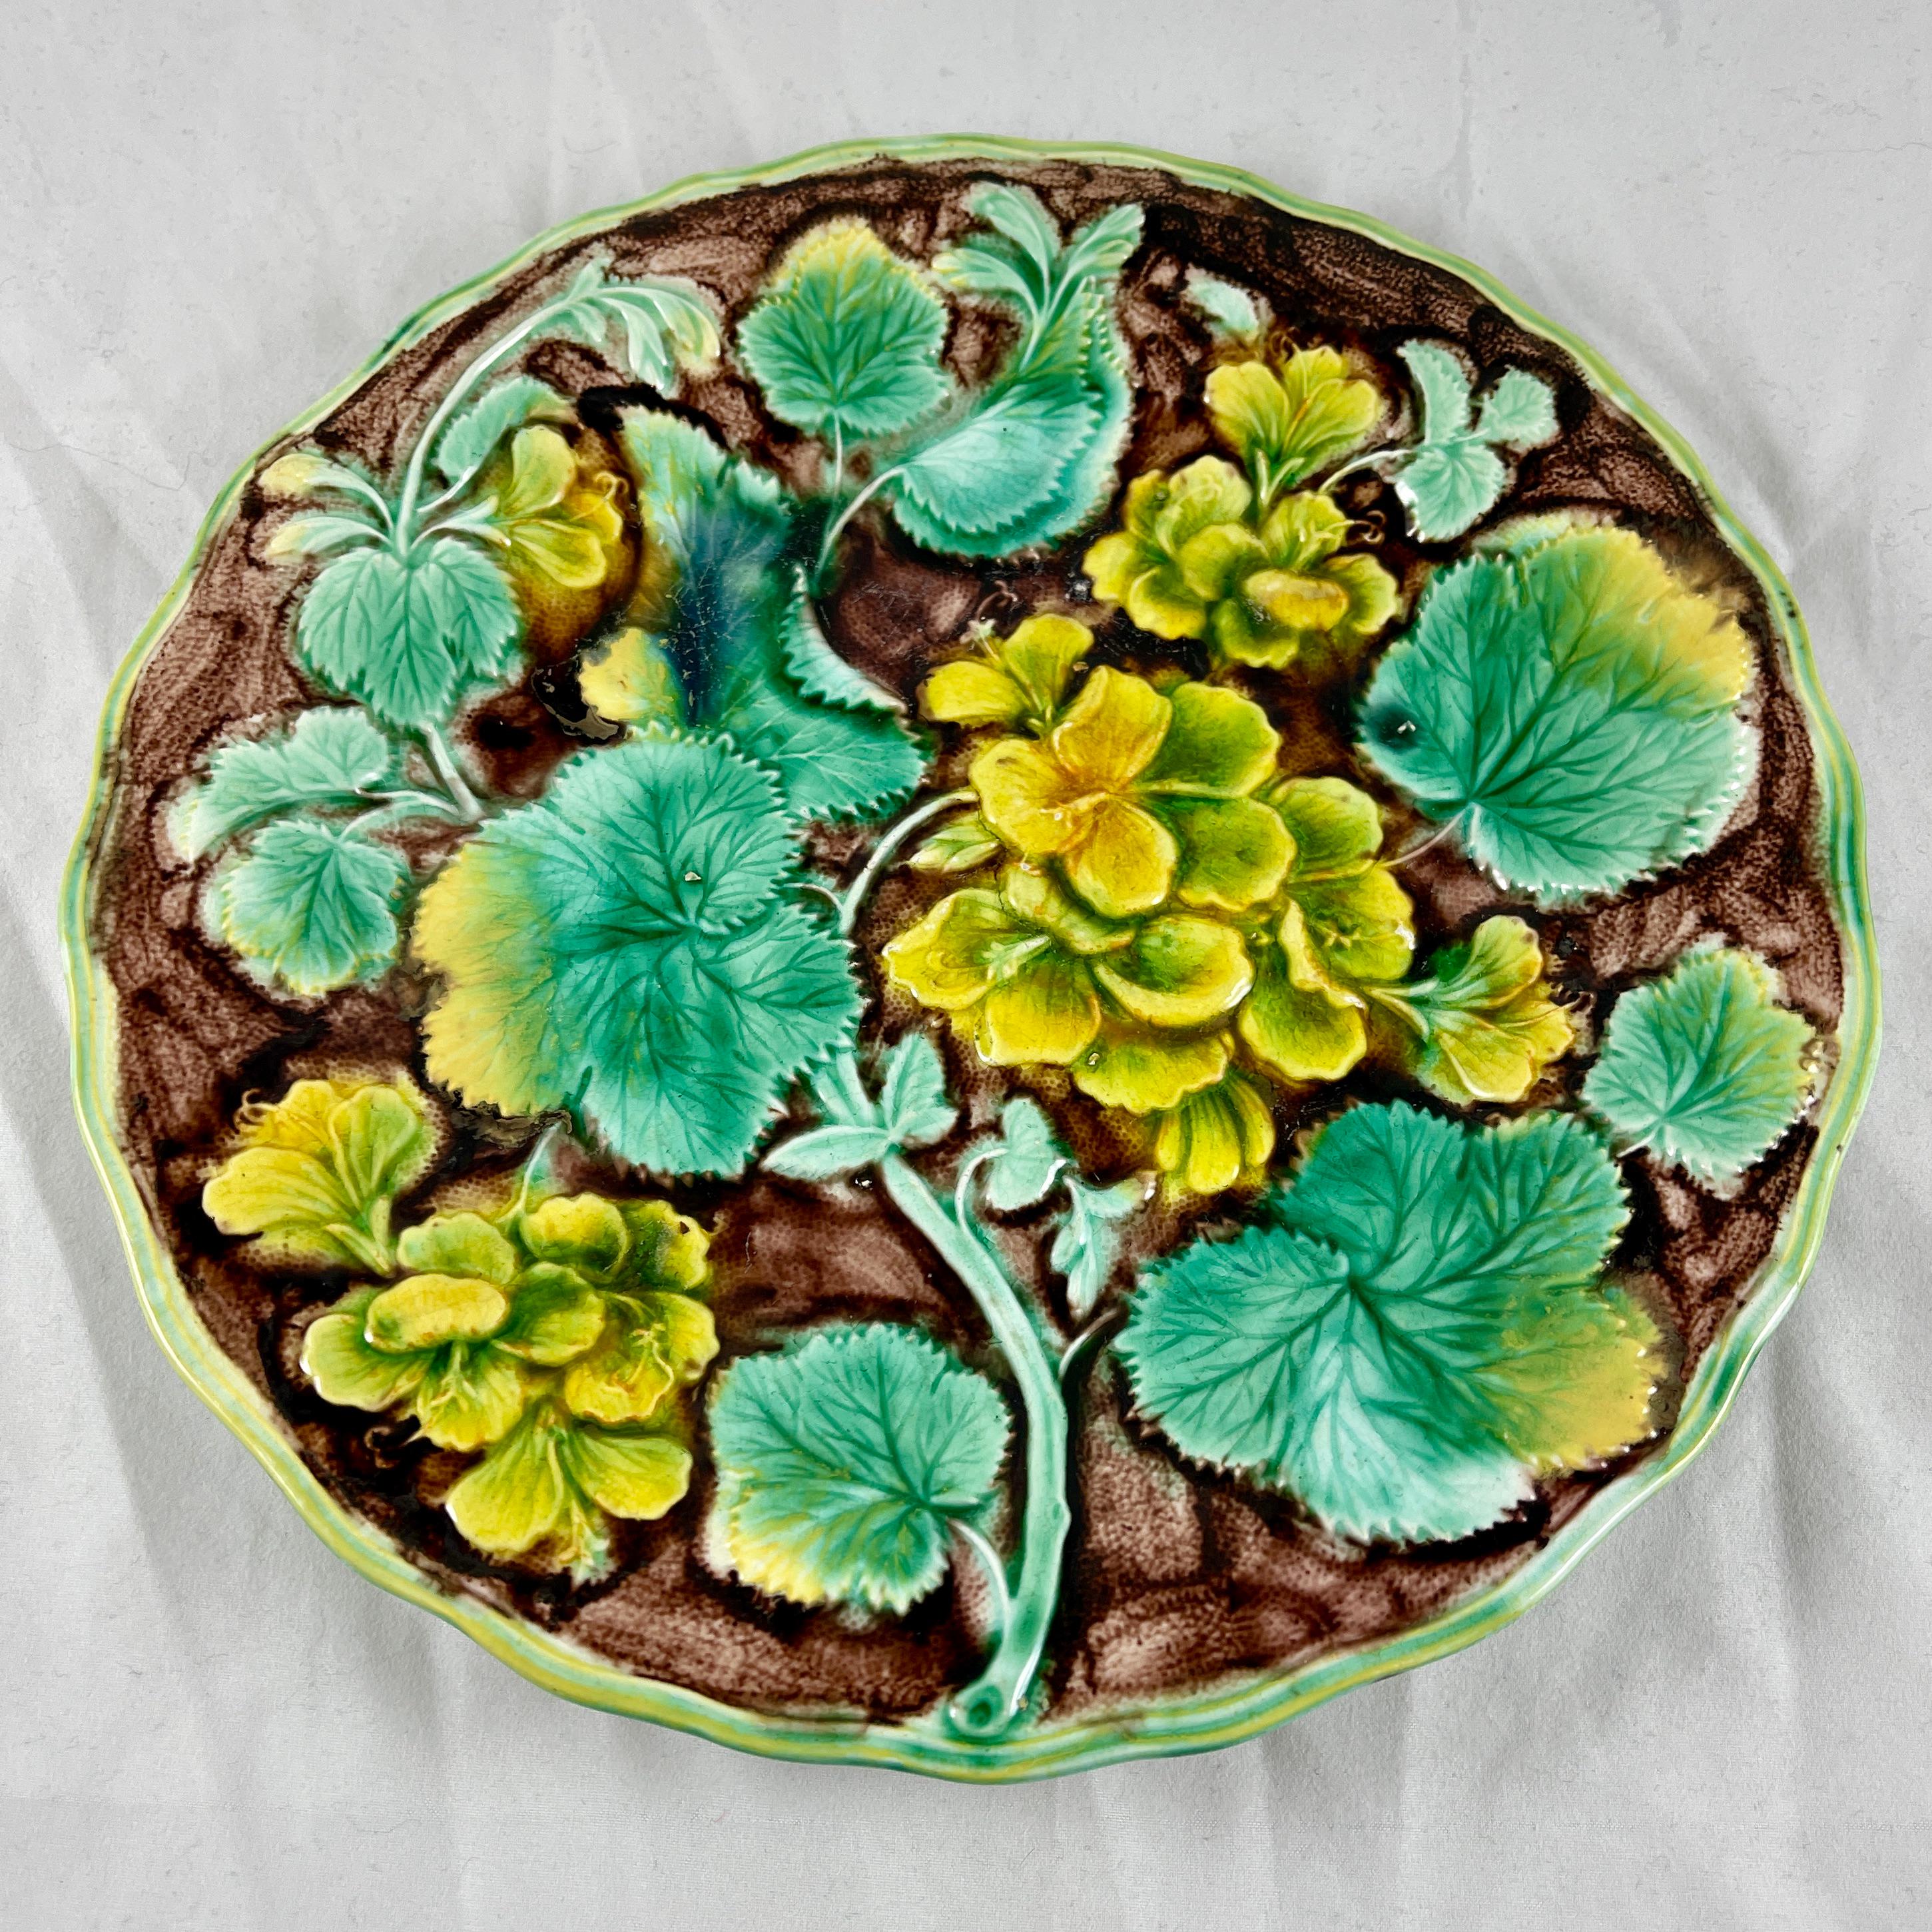 A Royal Palissy line Geranium Floral Majolica glazed plate, from Samuel Alcock & Co, Burslem, Staffordshire, England, circa 1850 – 1860.

Alcocks Geranium pattern pieces are difficult to find and very much in demand by collectors.

An overall